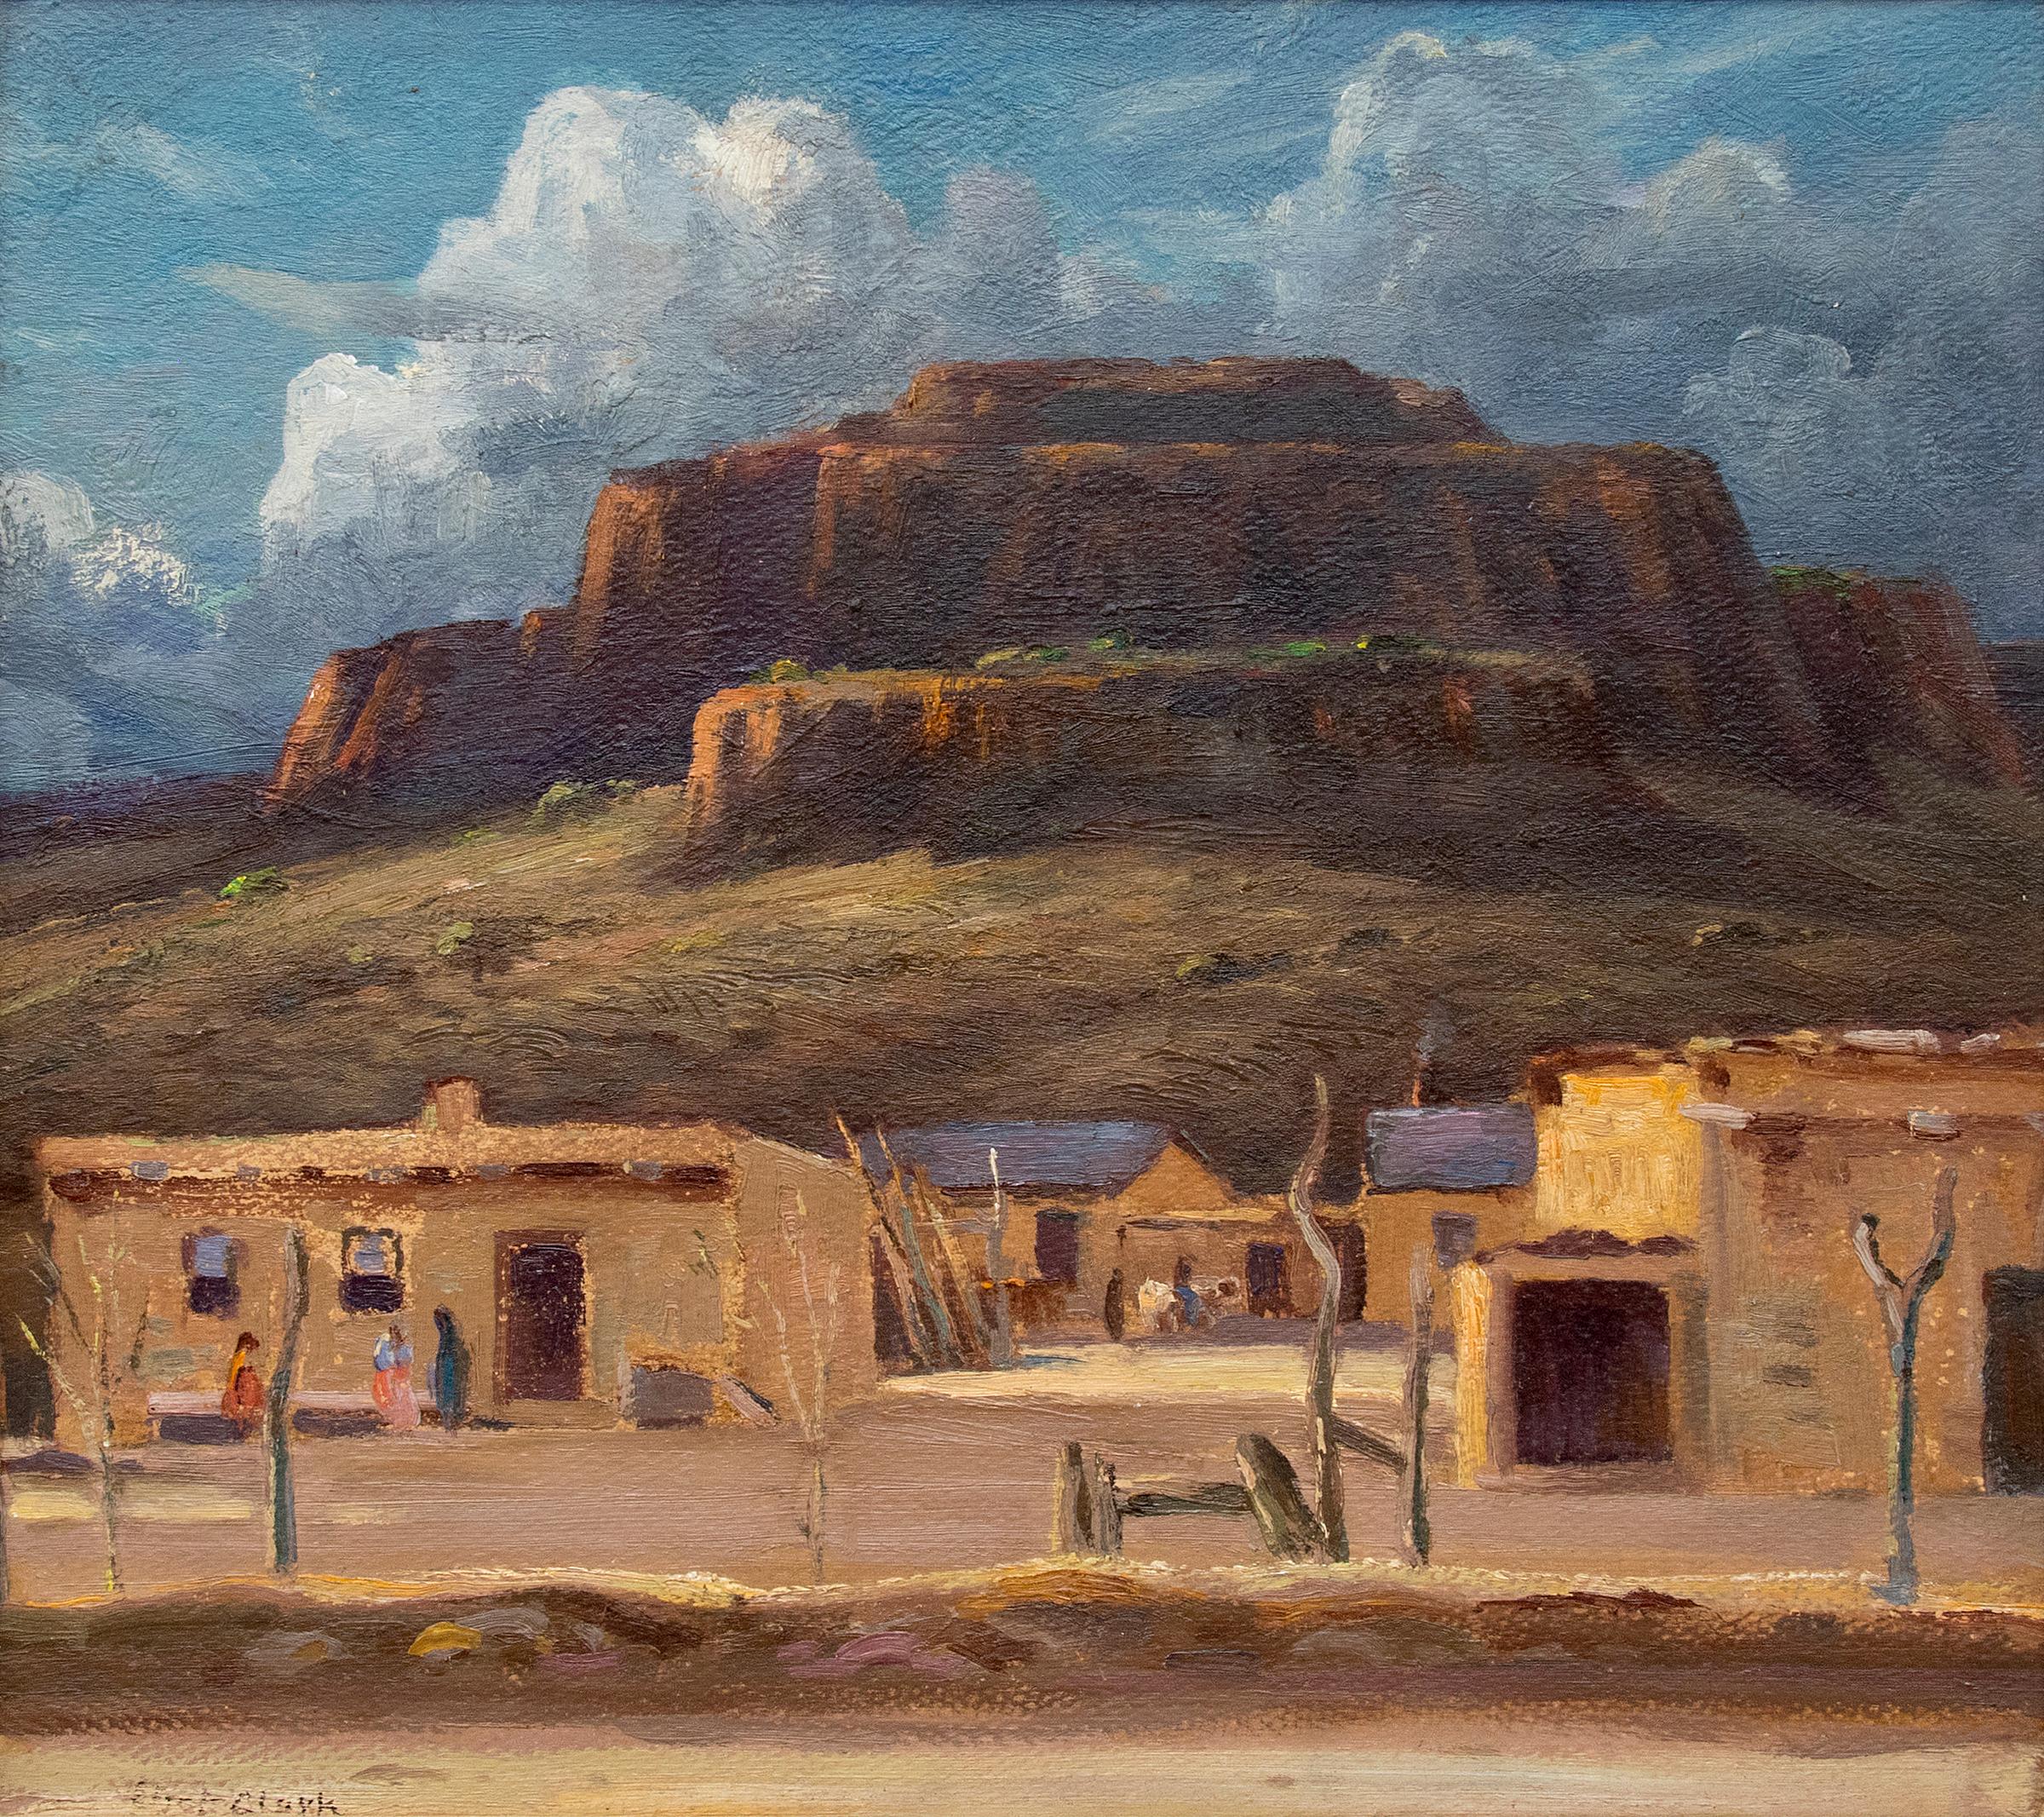 which artist of the 1920s and 1930s created this painting of the southwest